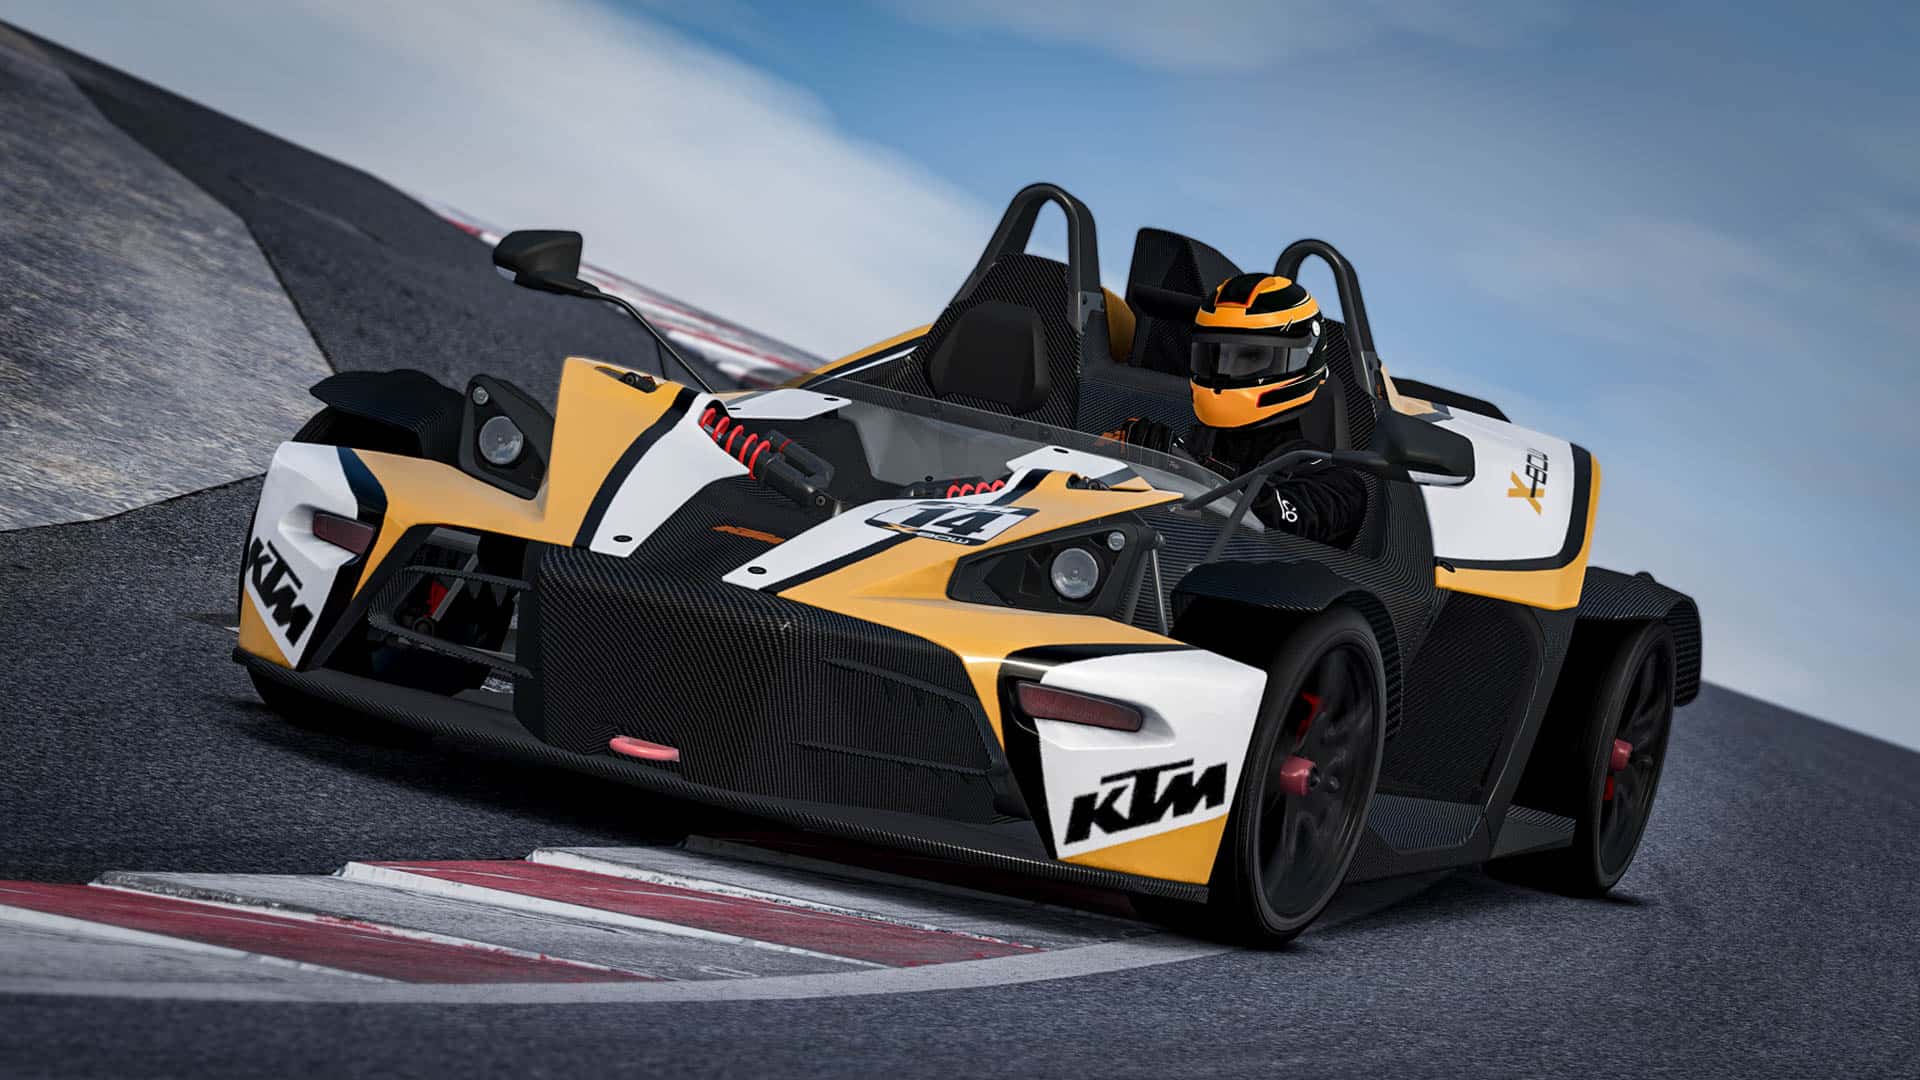 Assetto Corsa 2 Has a Launch Date - BoxThisLap